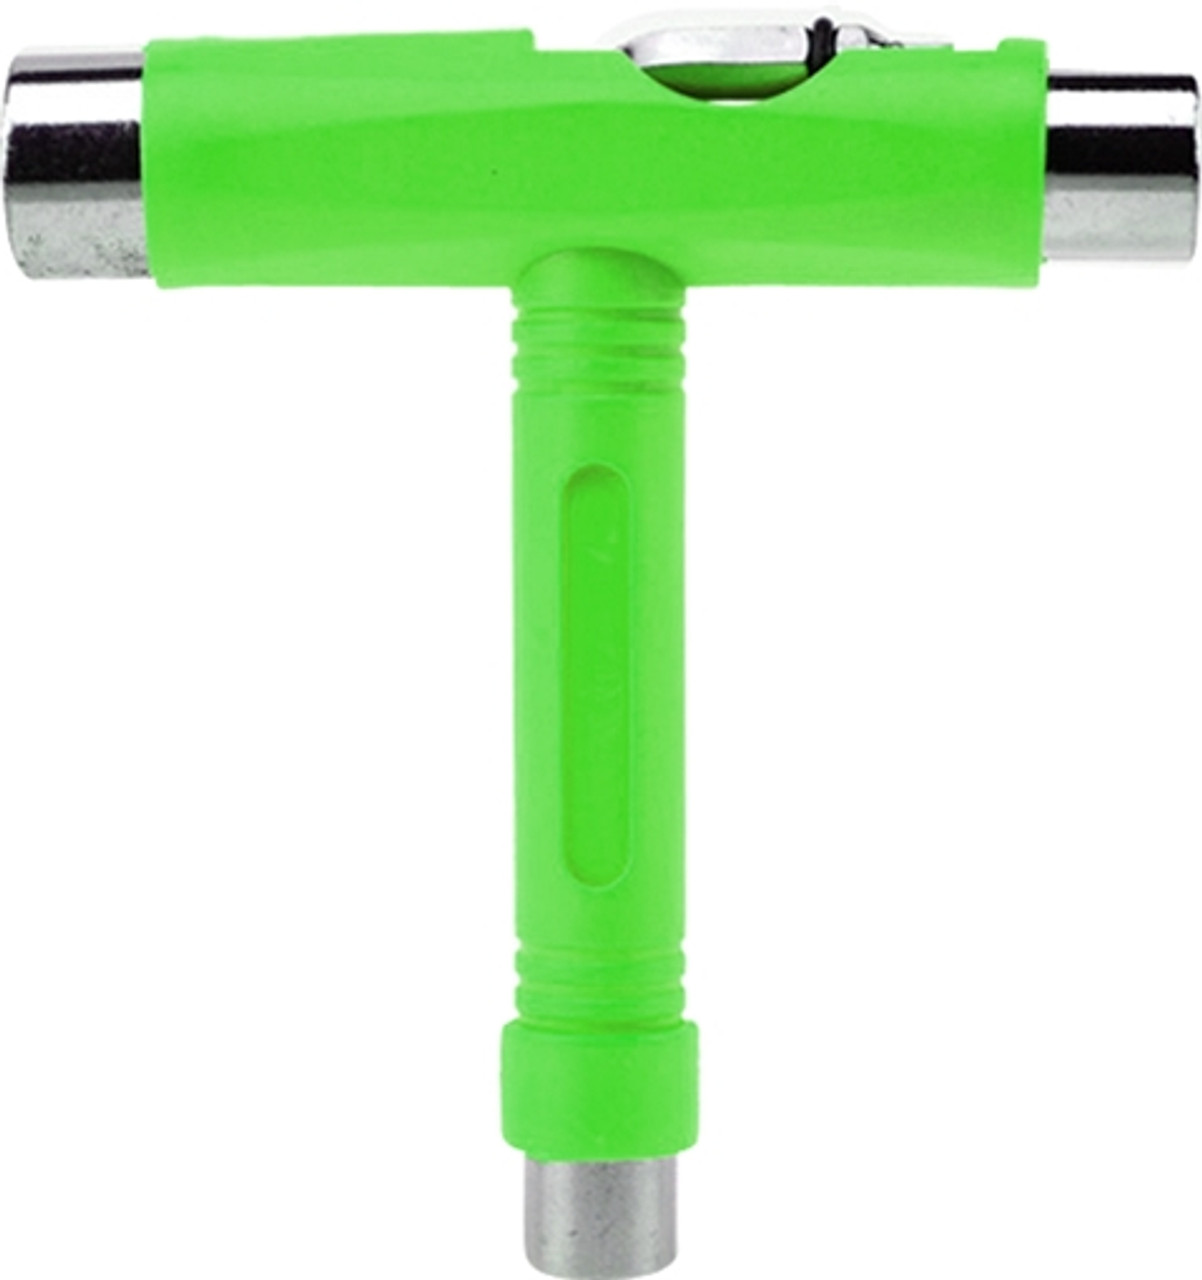 YOCAHER T-SKATE TOOL NEON GREEN